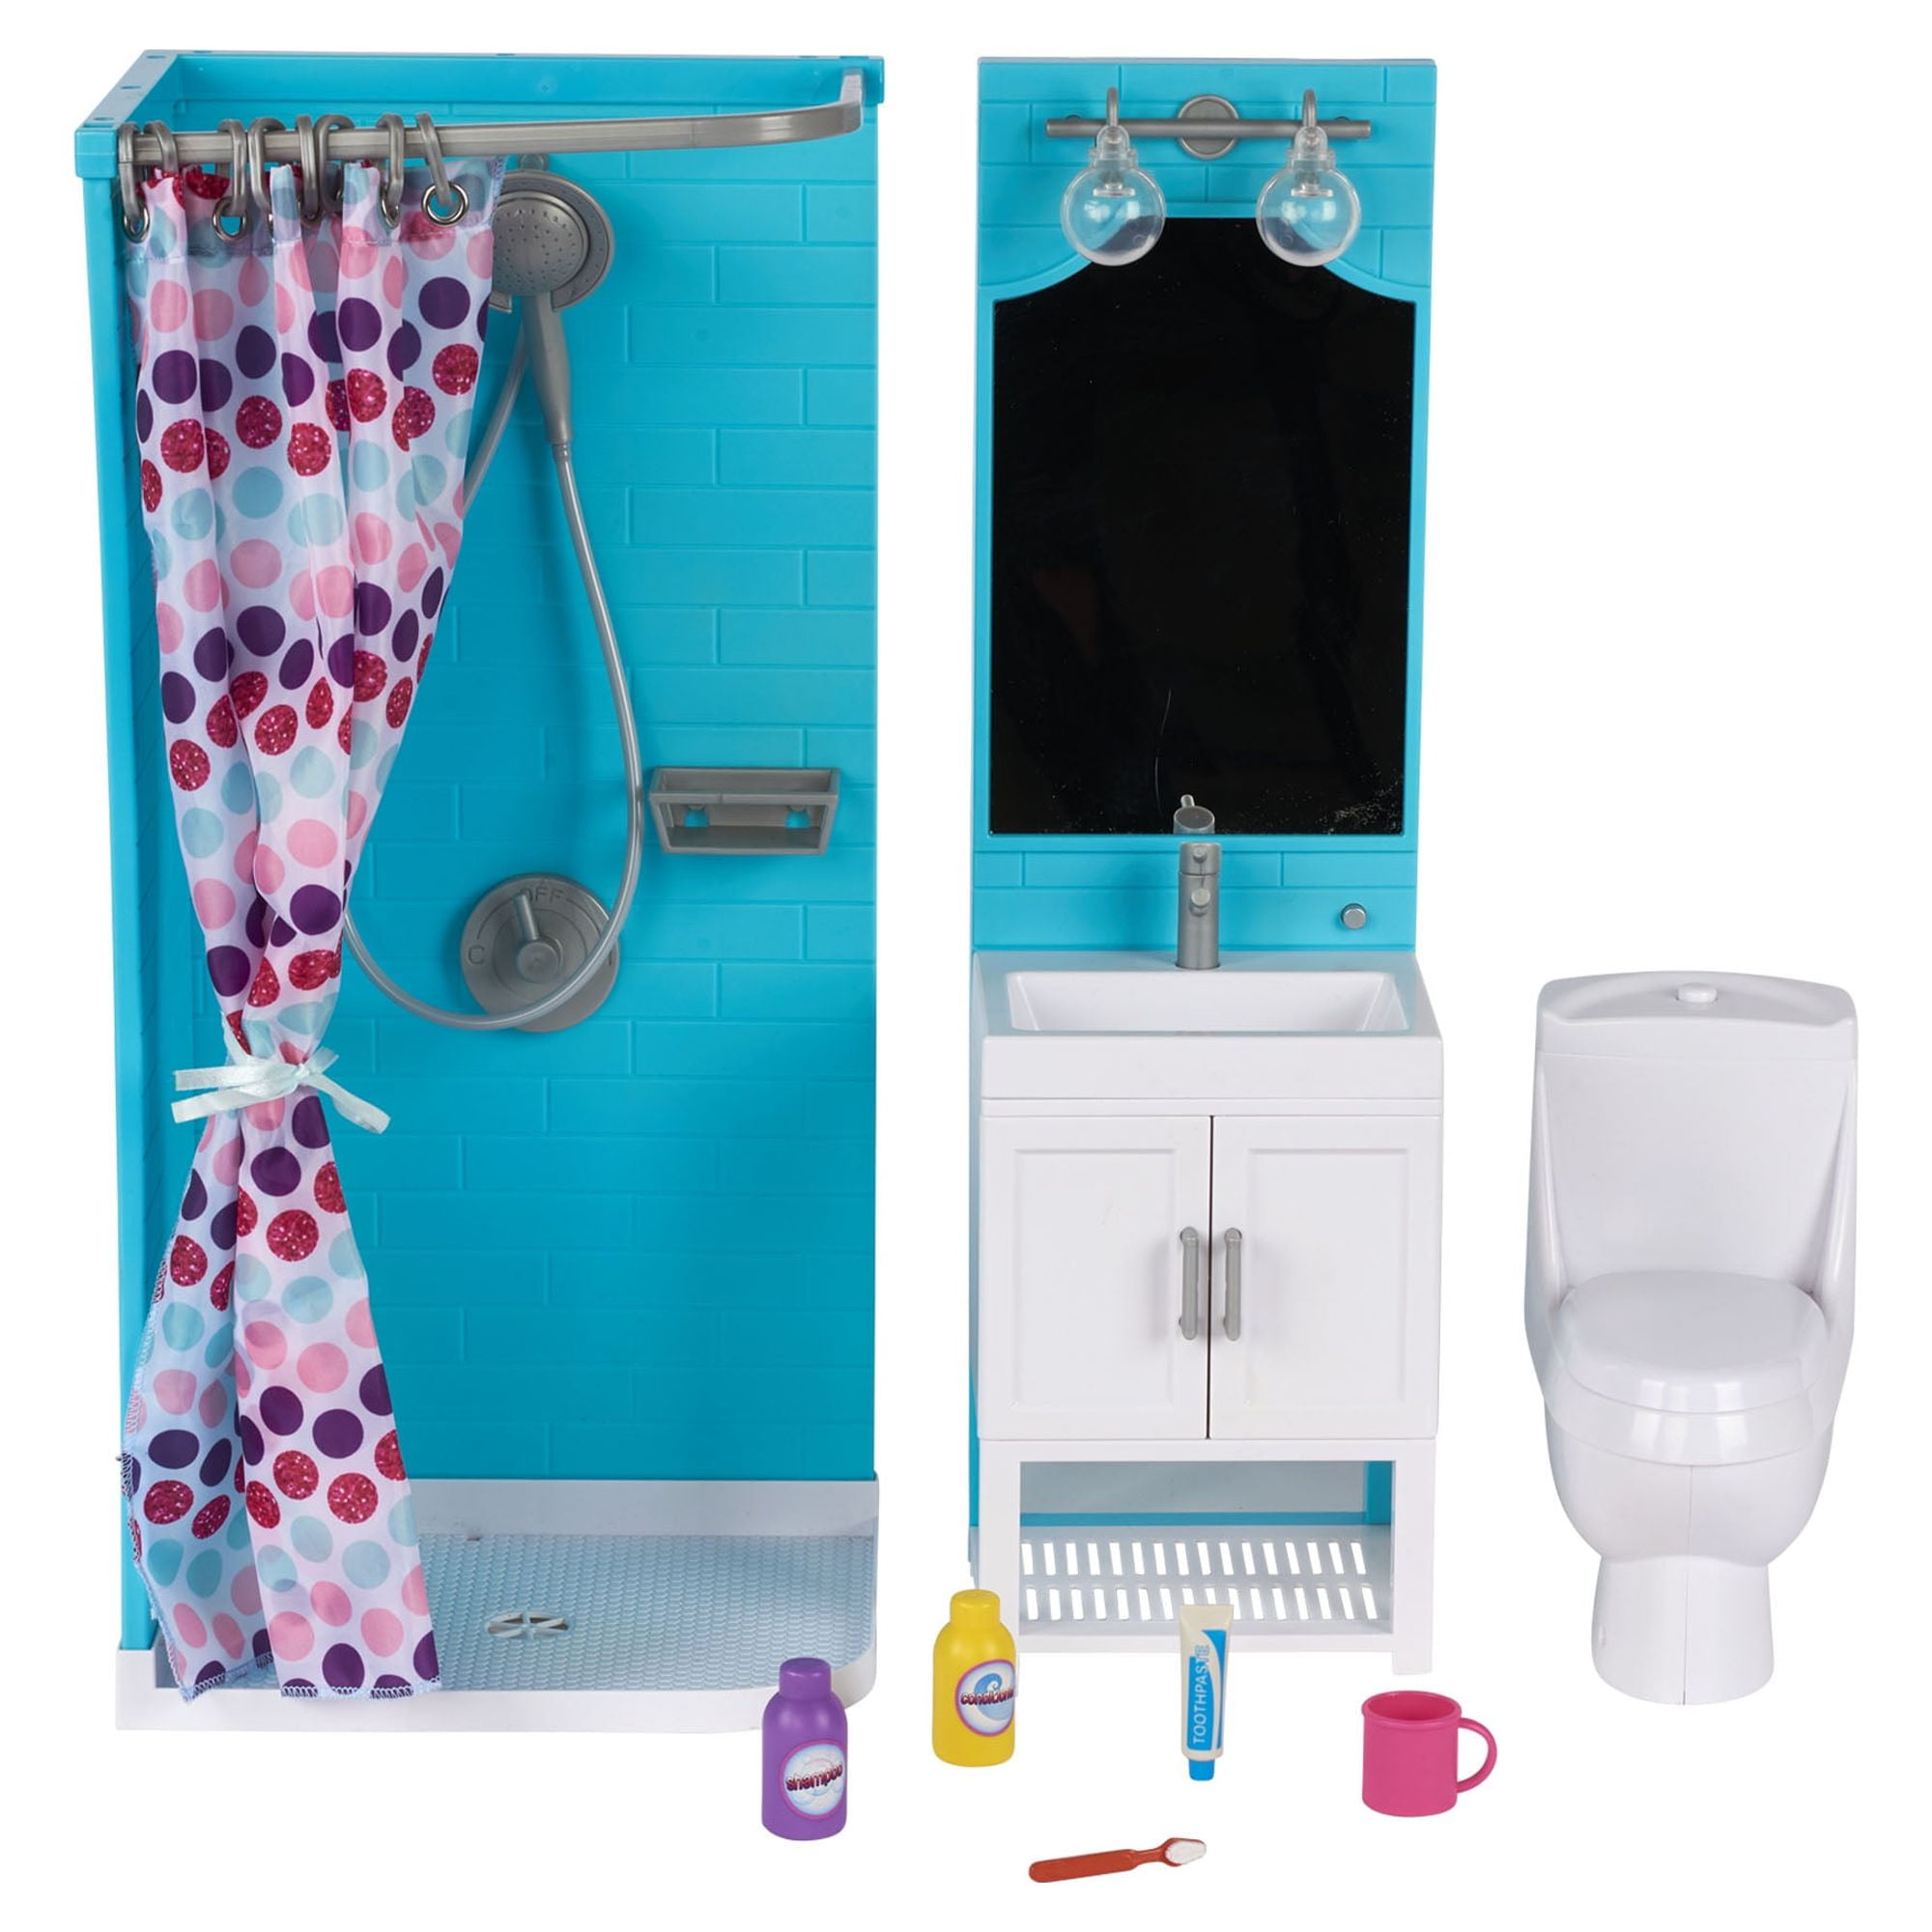 List of Things in the Bathroom, Bathroom Accessories and Furniture